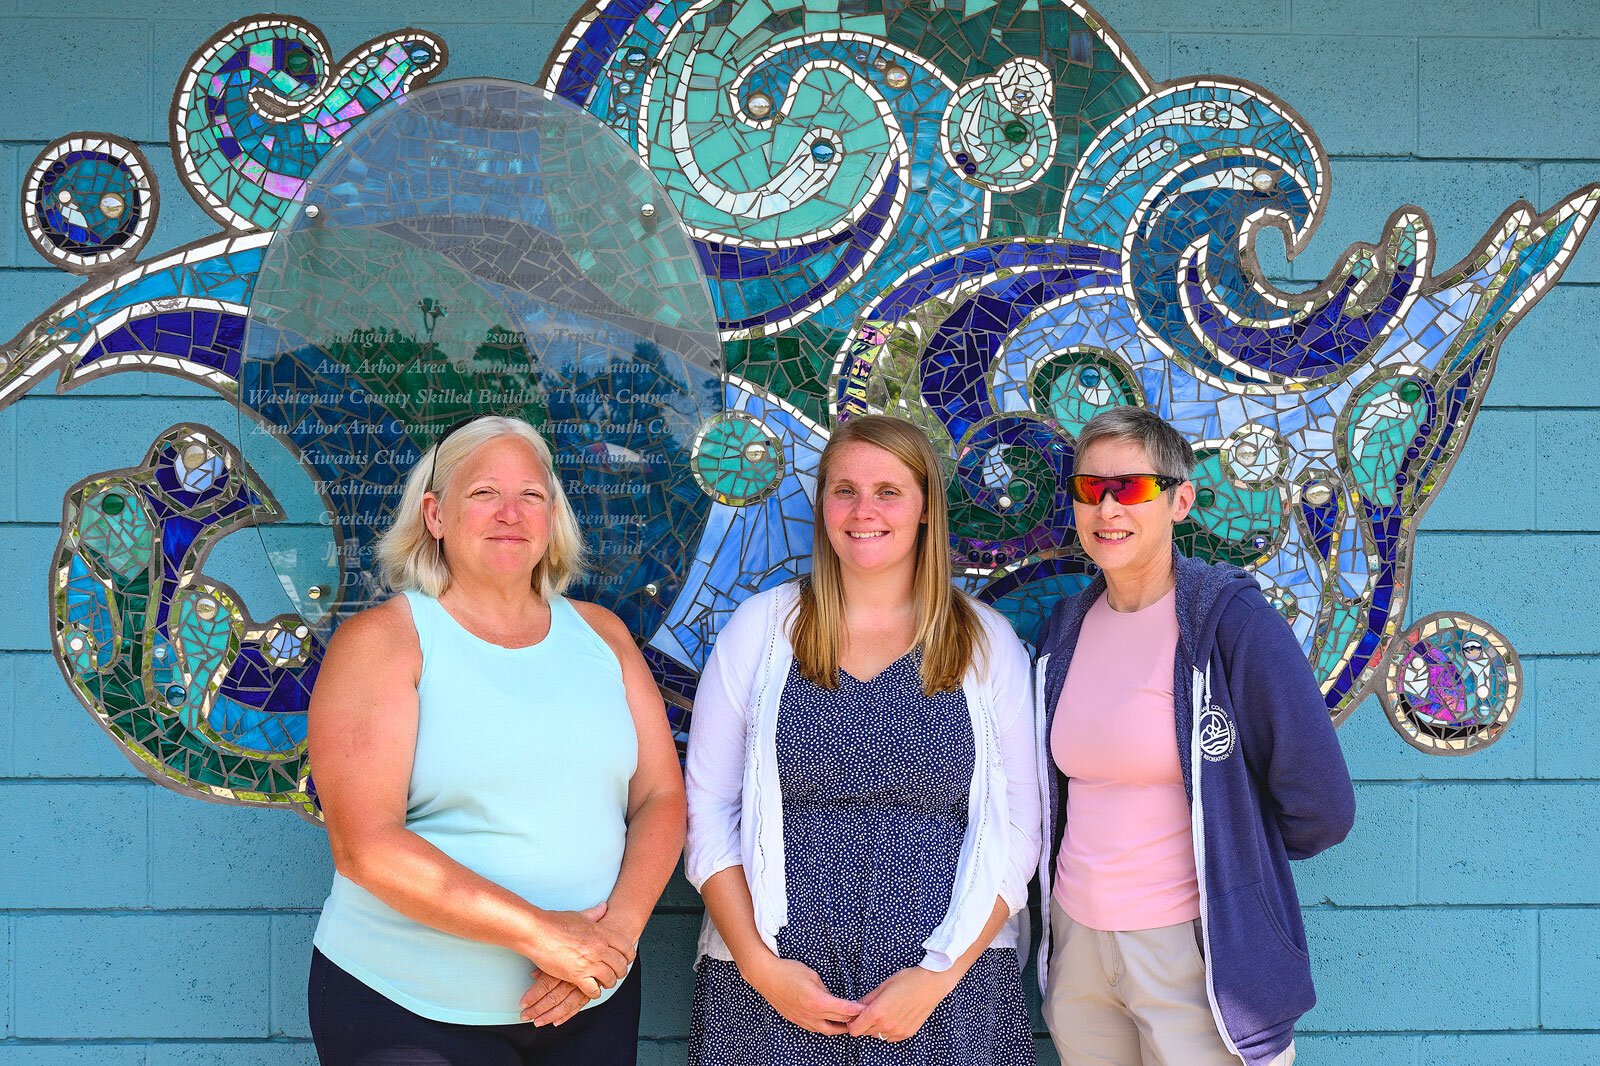 Cathy Thorburn, Alyson J. Kindall, and Diane E. Carr at the Rutherford Pool.